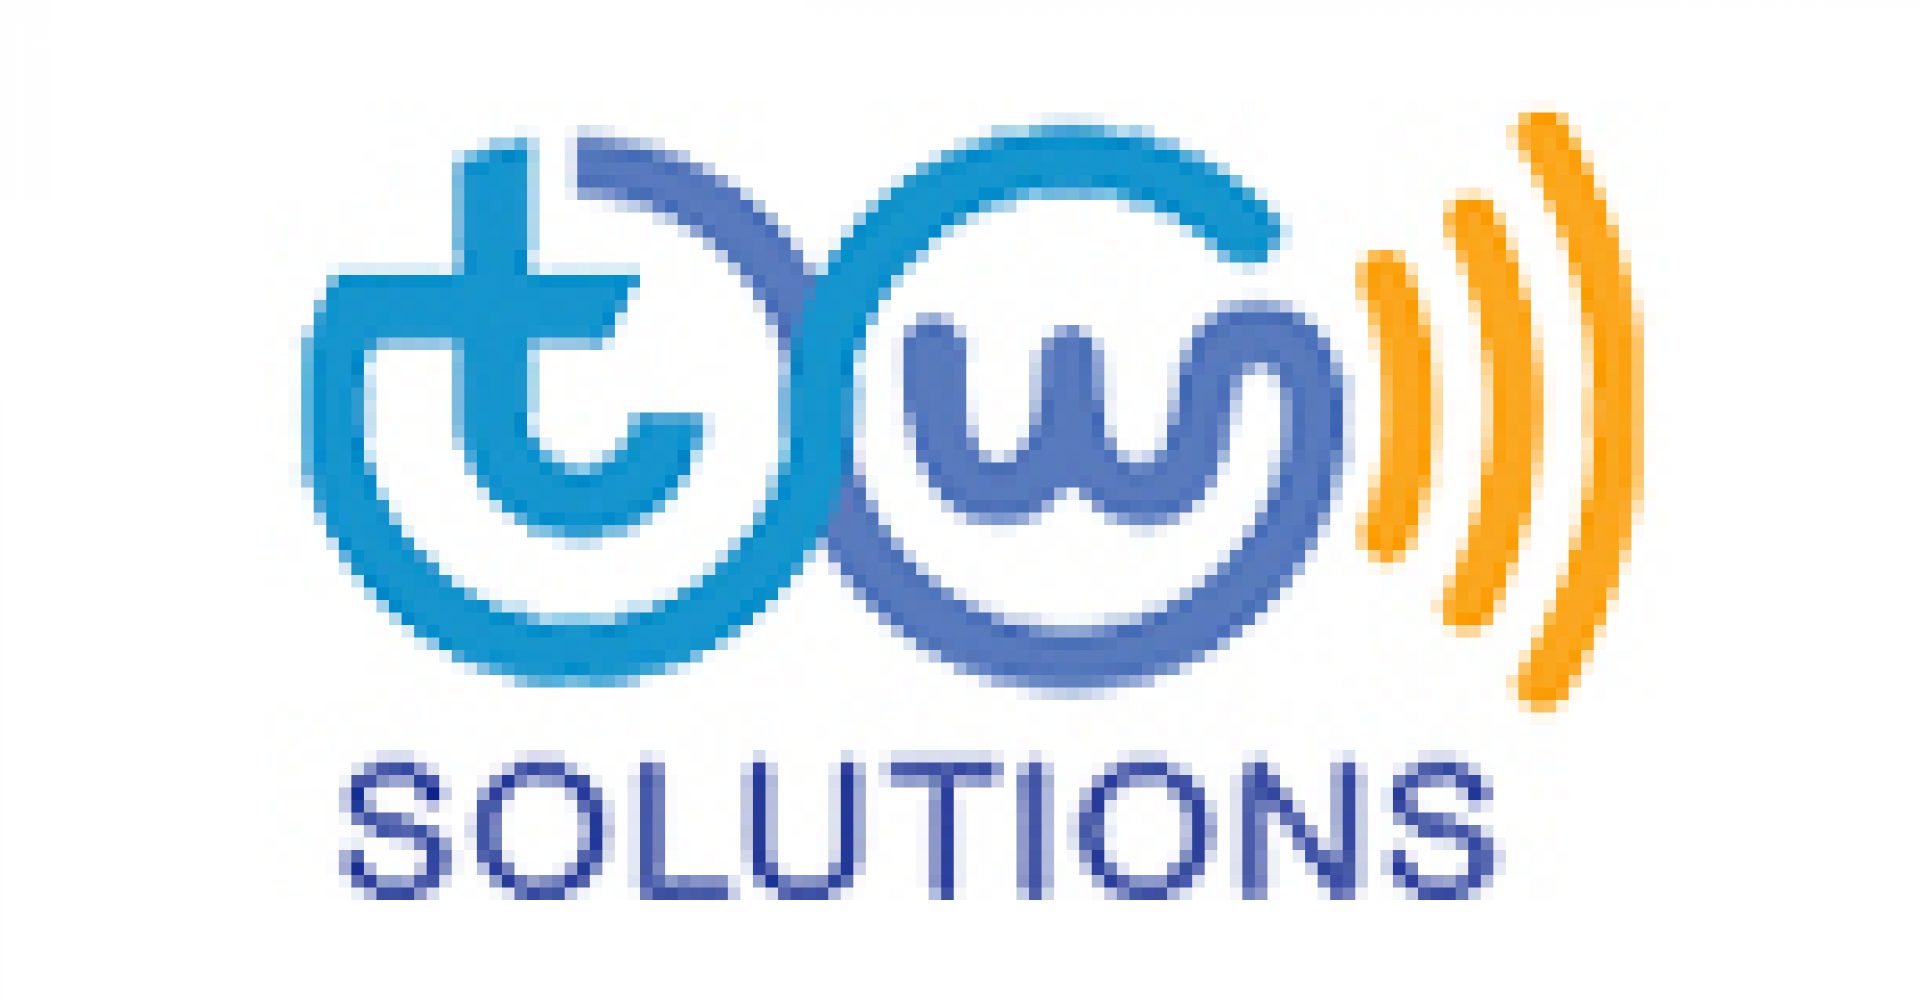 TW Solutions